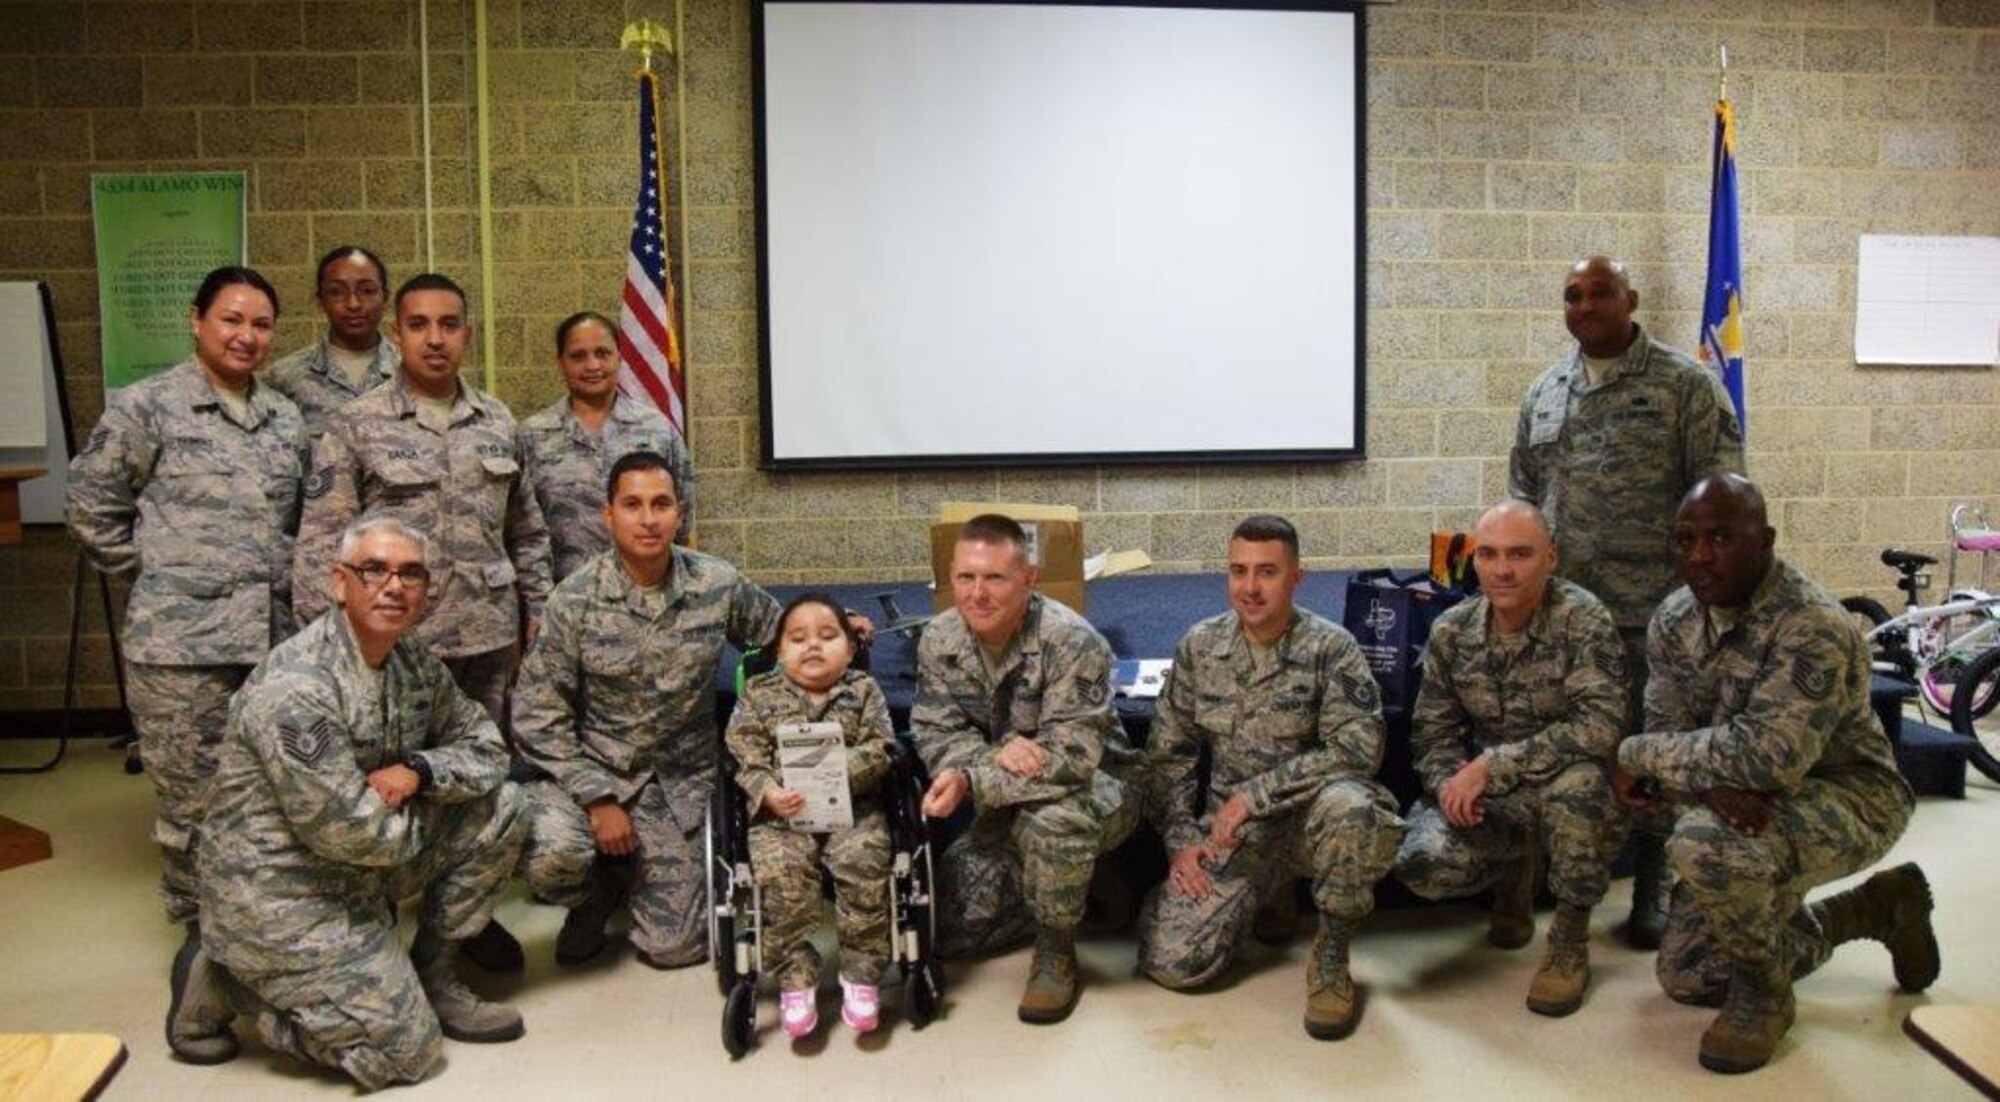 Five-year-old Mayra Salinas, center, poses with members of the 433rd Airlift Wing Rising 6, after being inducted into the group Nov. 5, 2016 at Joint Base San Antonio-Lackland, Texas. Salinas and her family spent the day with members of the Rising 6, visiting the Alamo Wing and getting an up-close look at the C-5M Super Galaxy. The Rising 6 is a private organization comprised of Airmen grades E-1 through E-6. (U.S. Air Force photo/Tech. Sgt. Carlos J. Treviño)